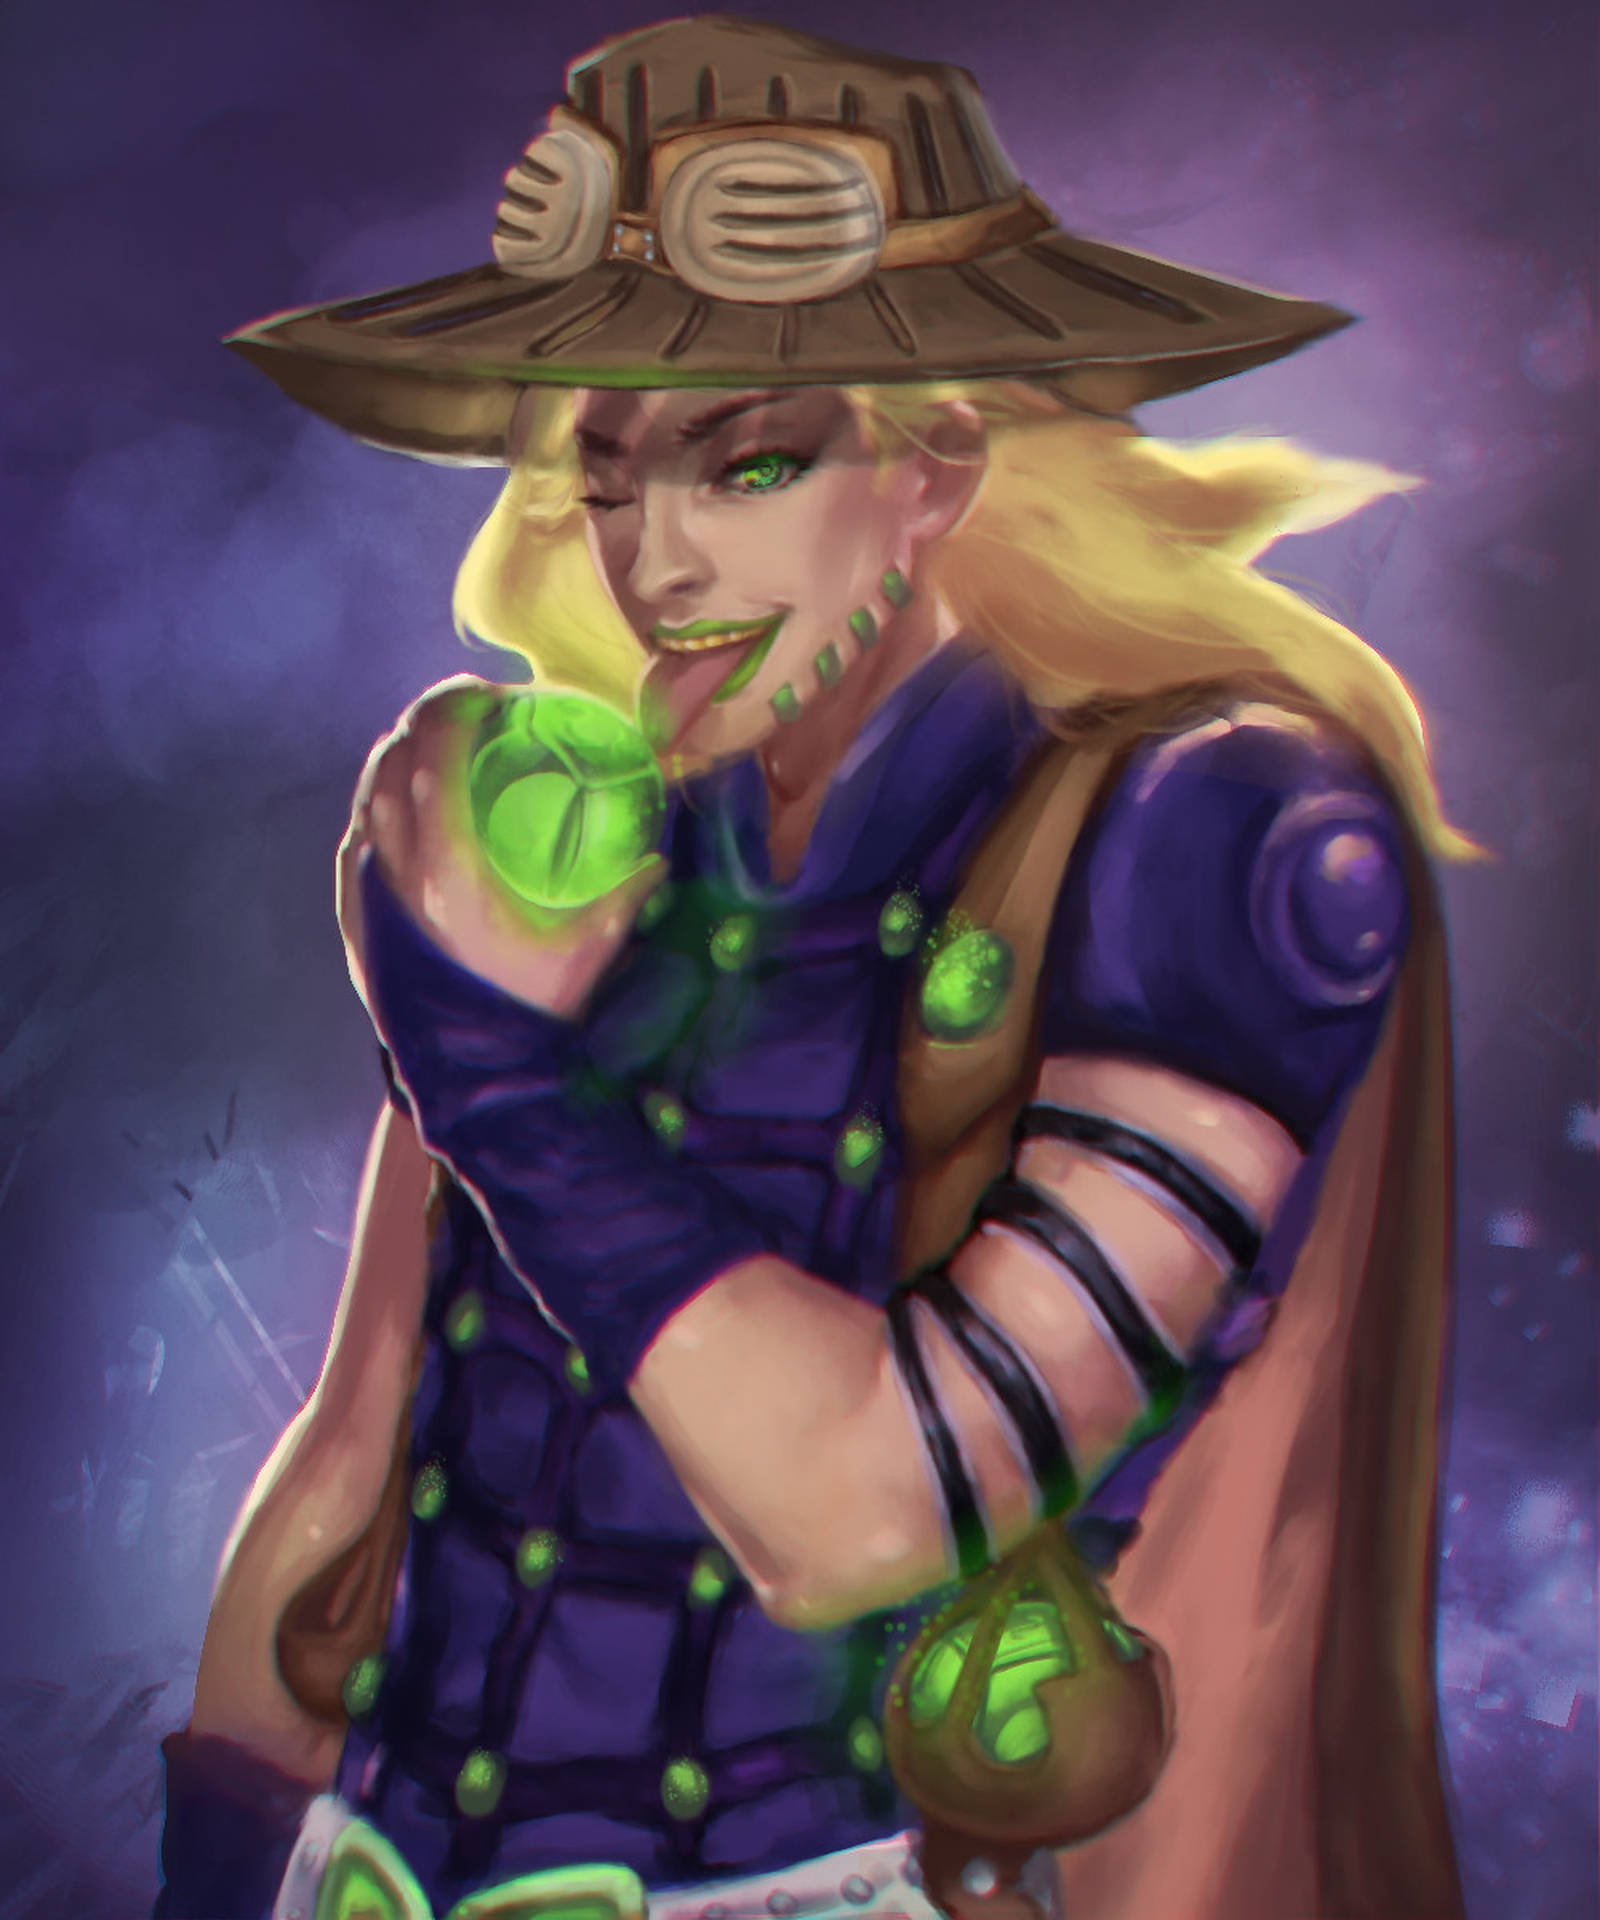 Gyro Zeppeli Sticking Tongue Out Background